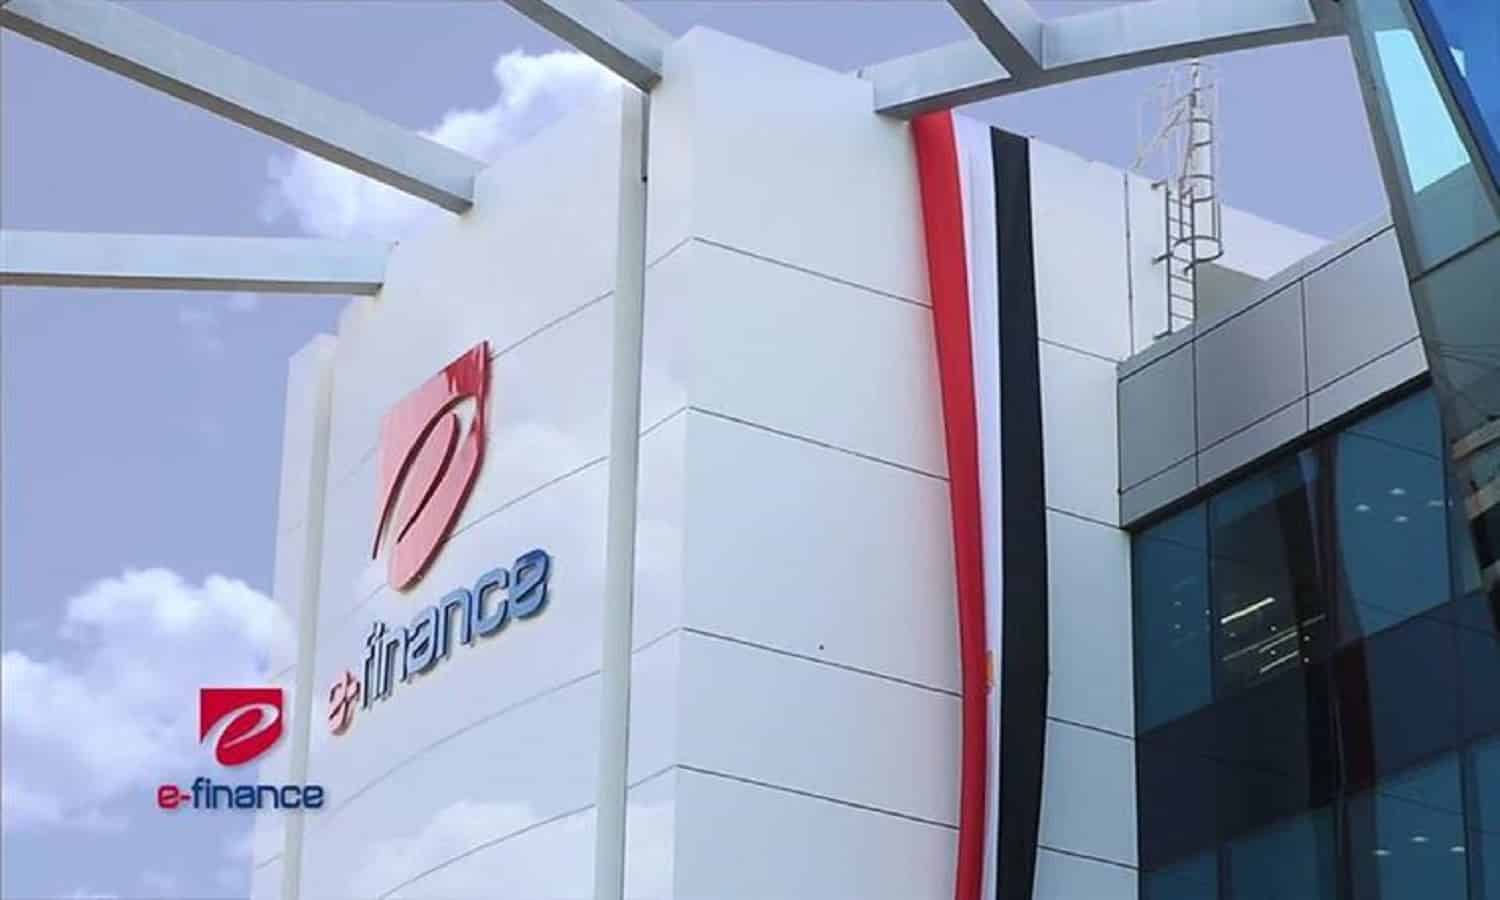 e-finance acquires minority stake in 2 e-payment firms

